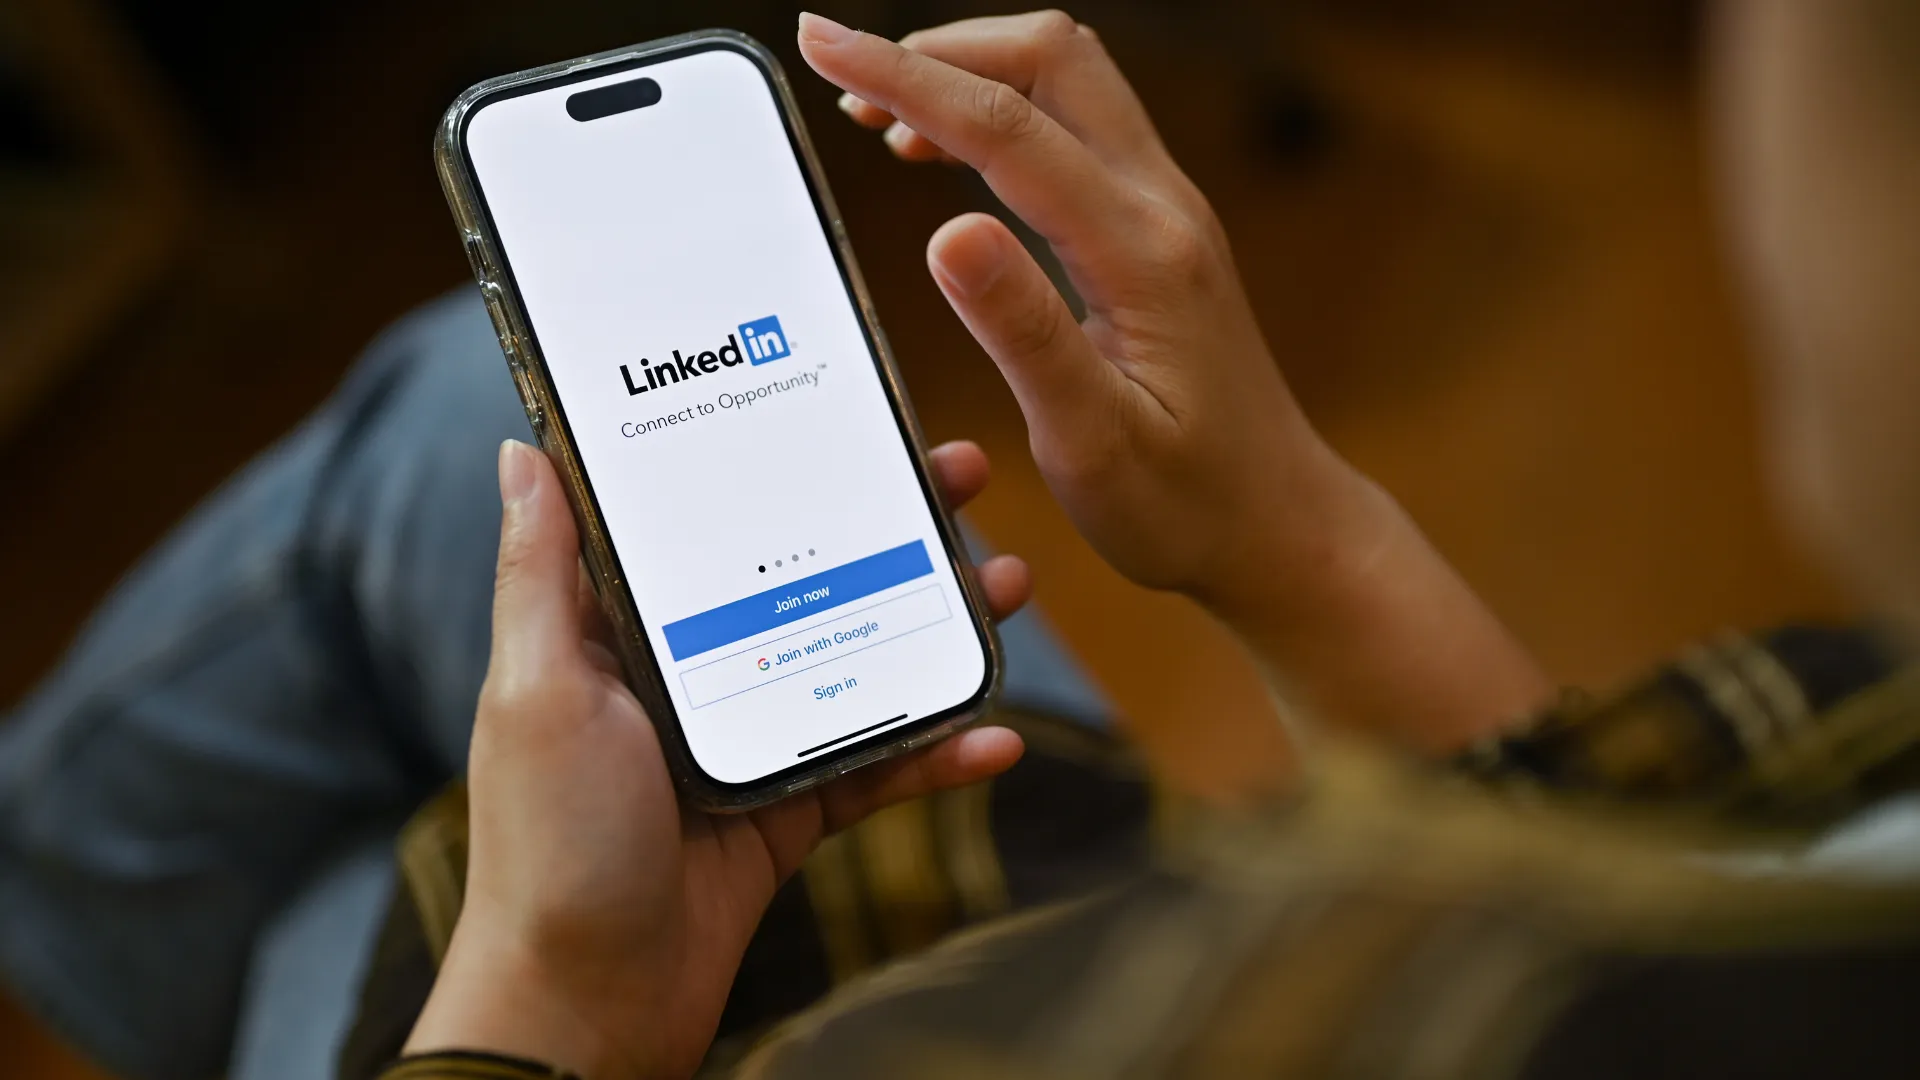 If you have fallen victim to a LinkedIn scam, it's essential to report the incident to the Internet Crime Complaint Center (IC3) to help prevent future scams and potentially recover any losses incurred.